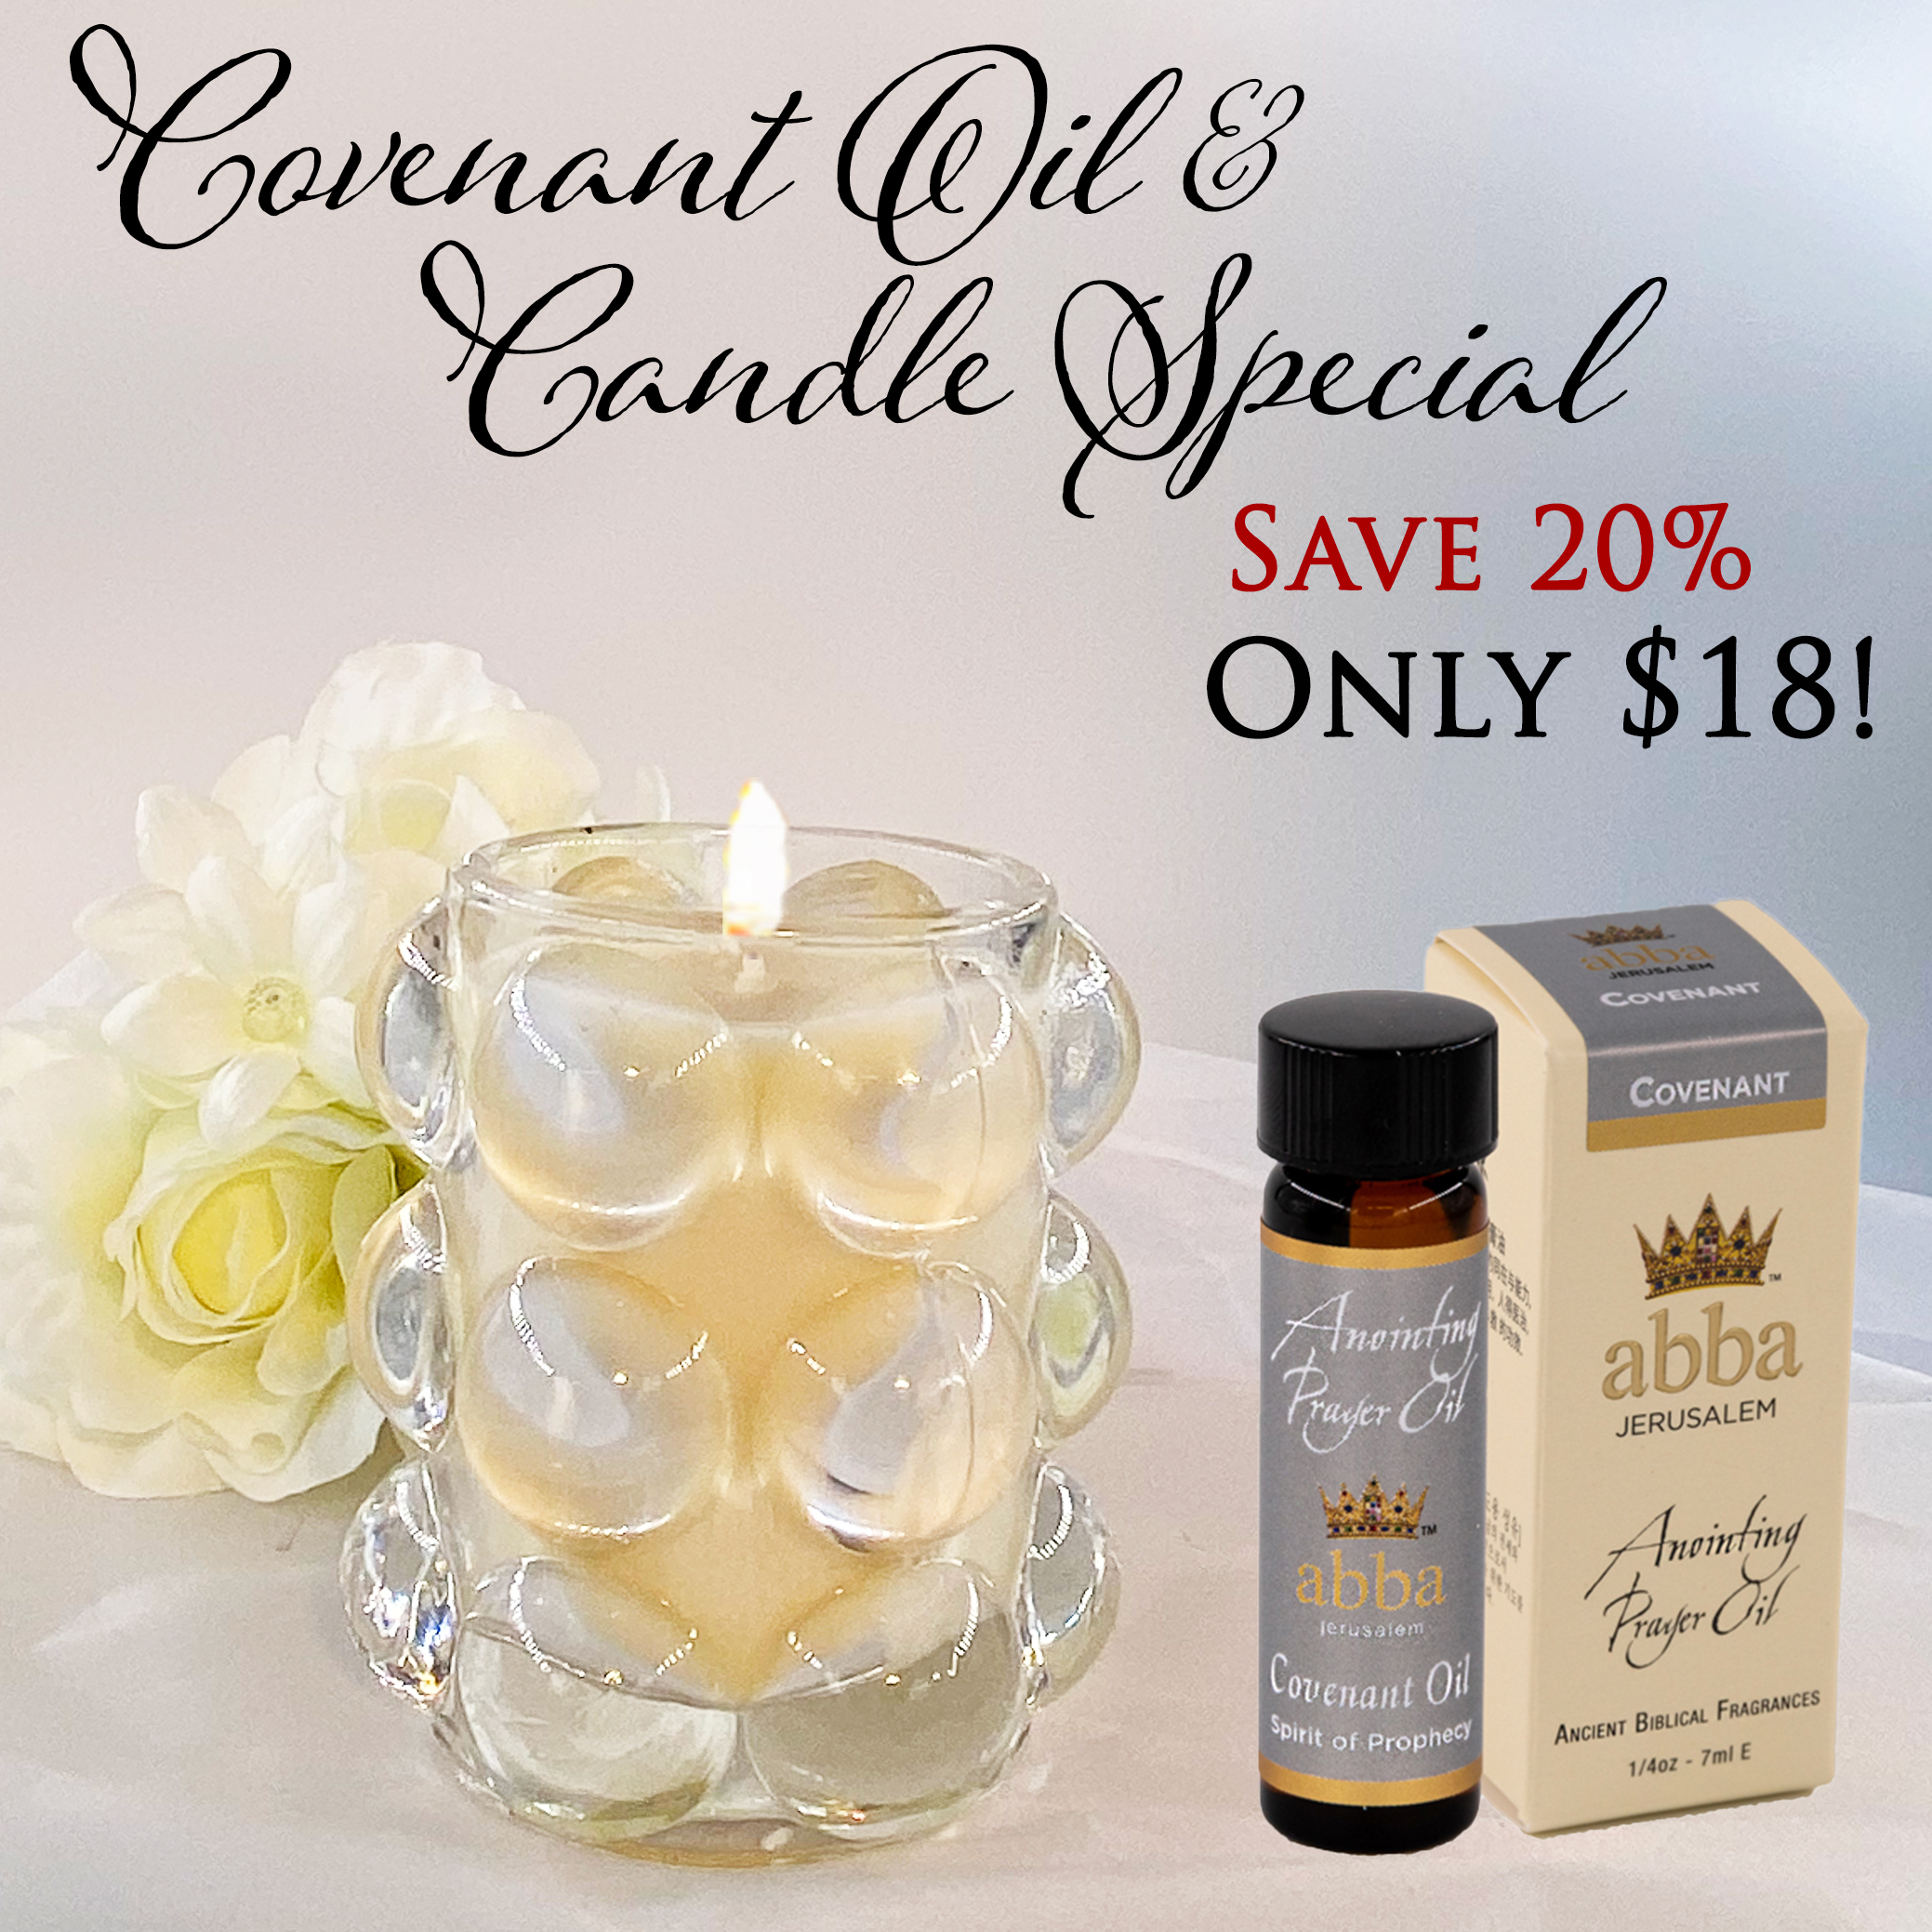 COVENANT HOBNAIL CANDLE & OIL SPECIAL - SAVE 20%